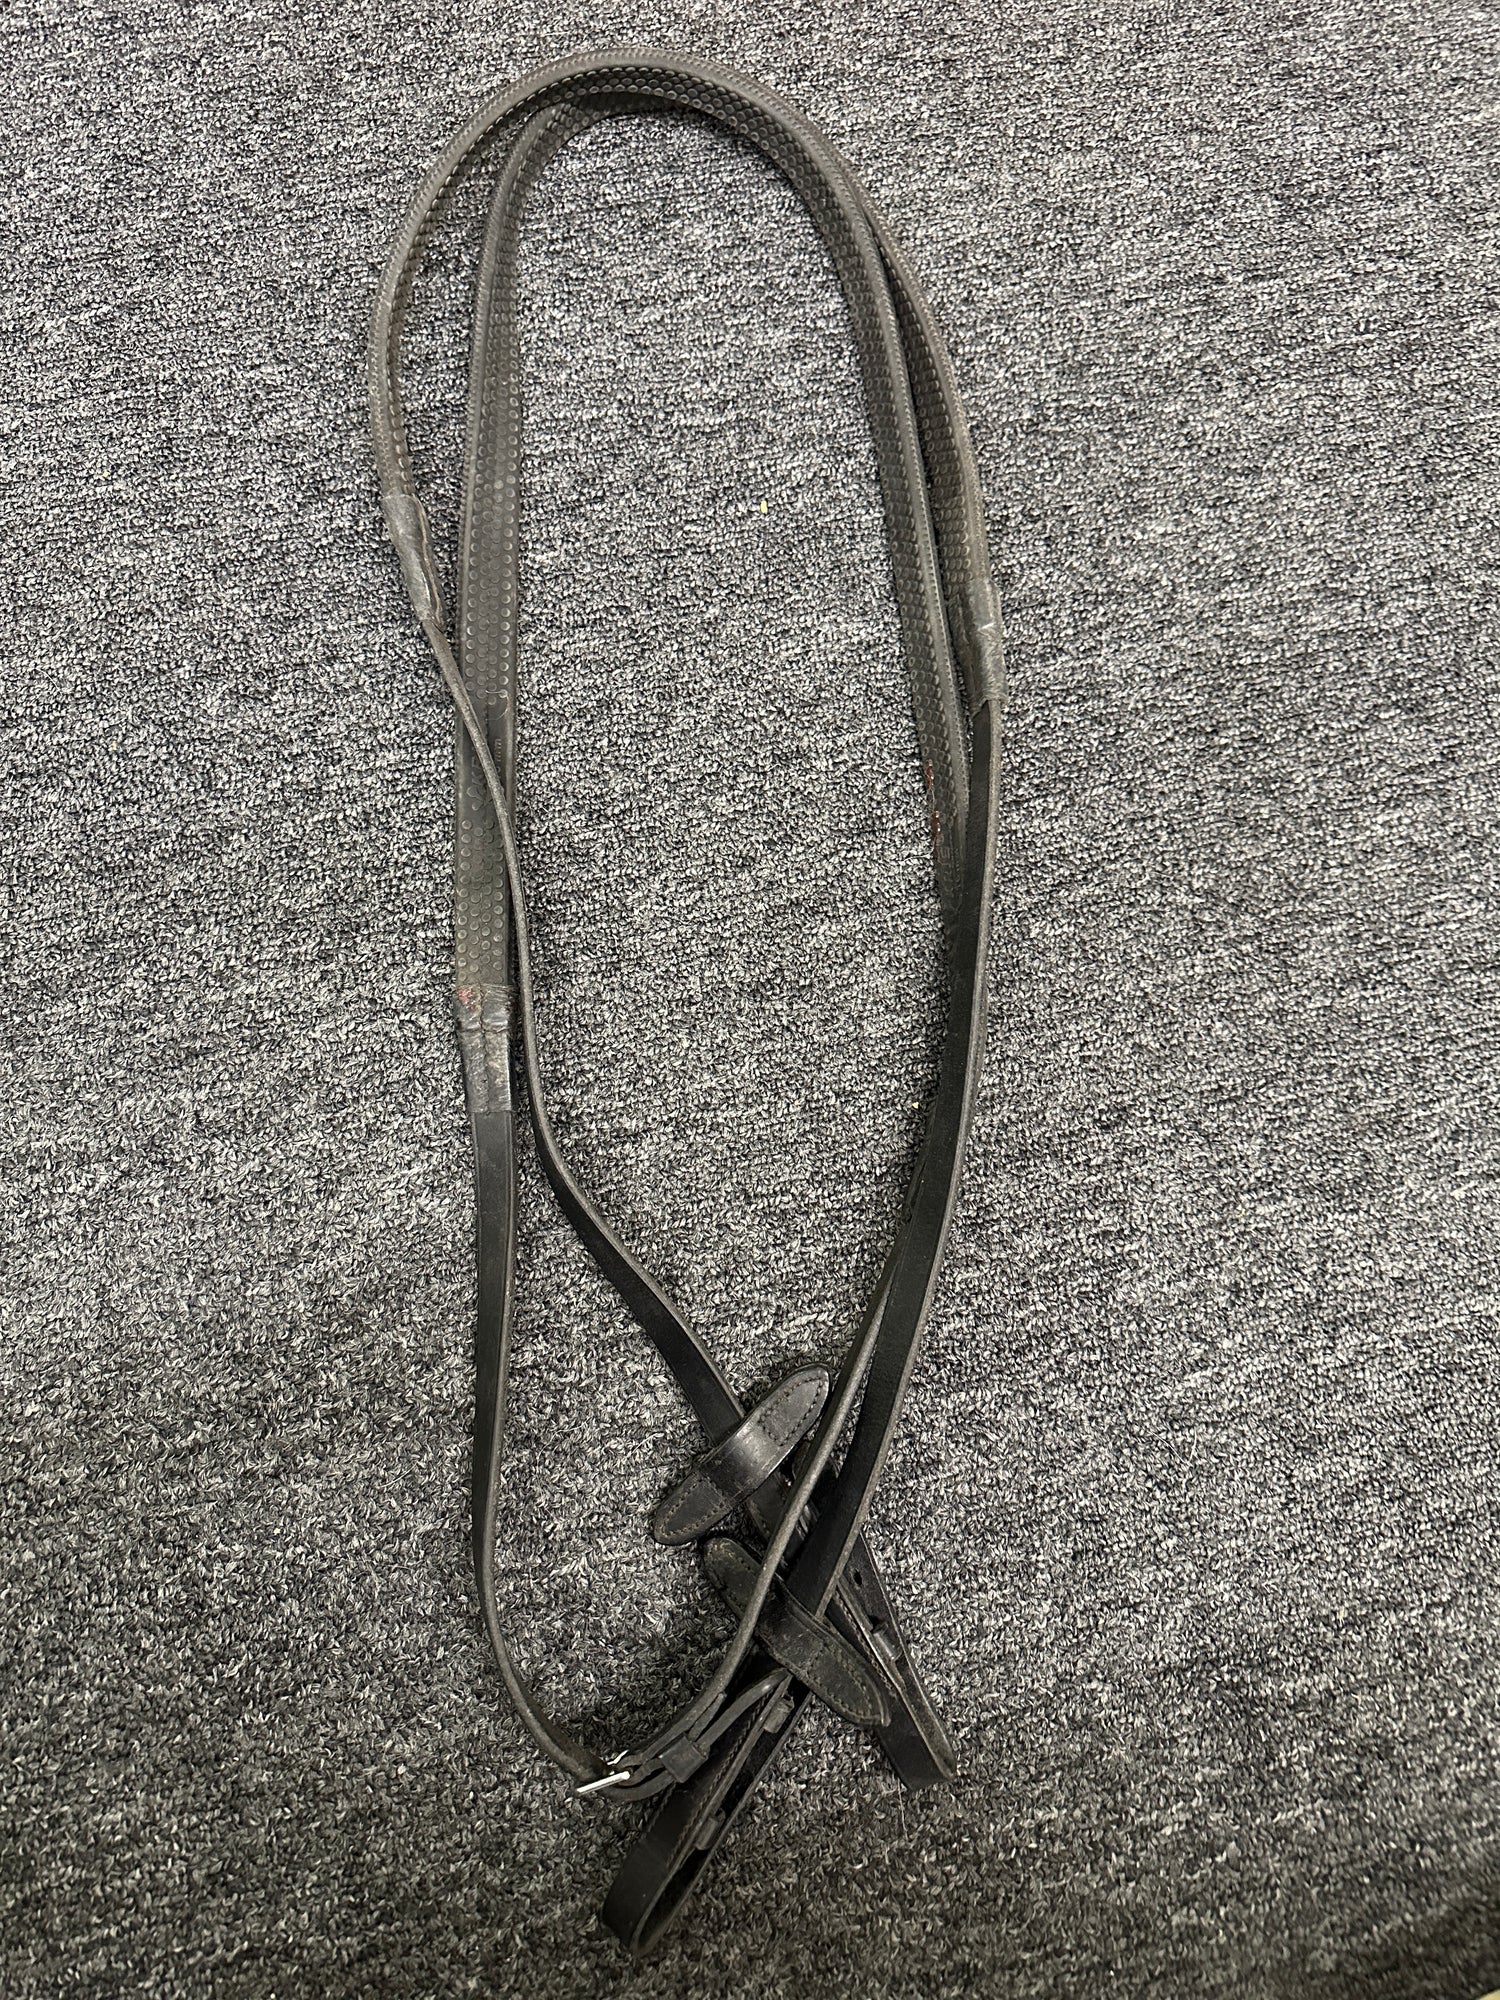 Black Rubber Reins - used